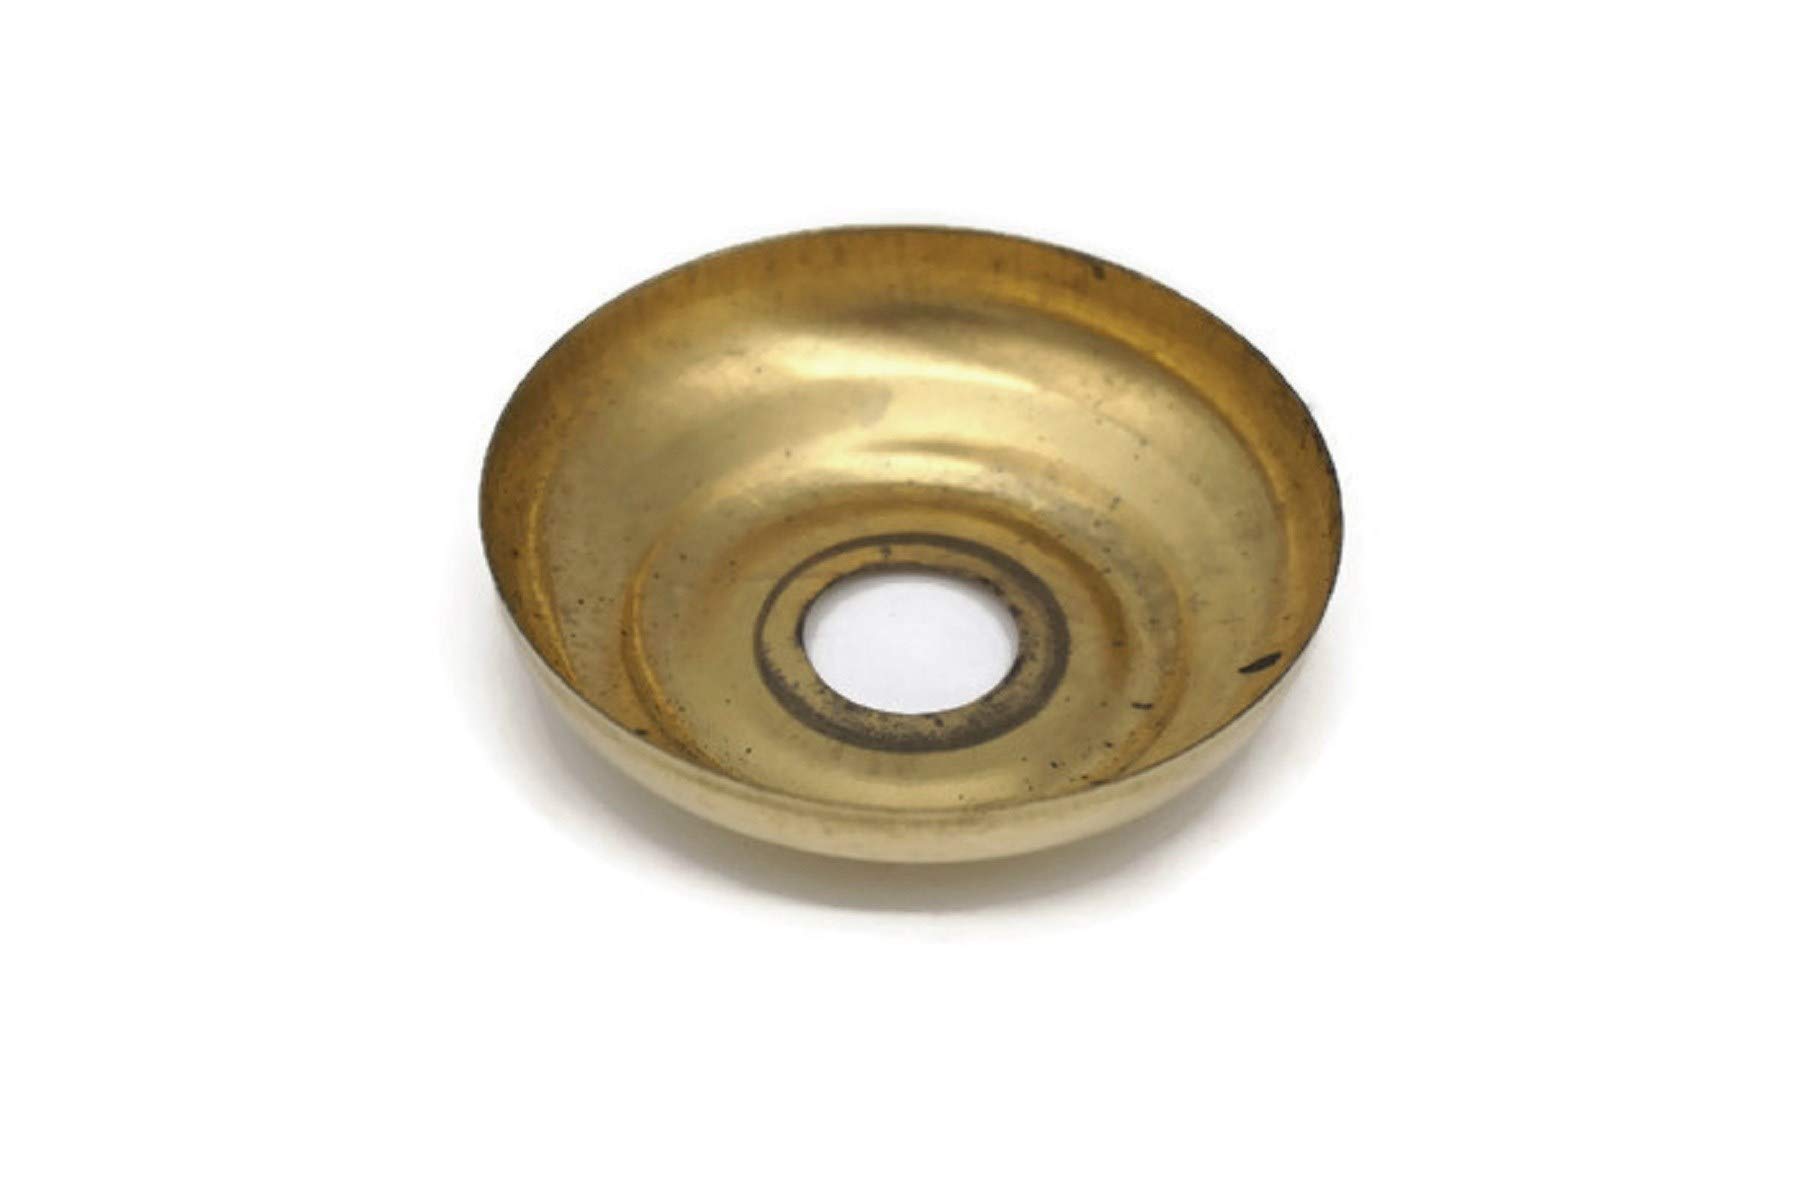 Brass Bed Ball Finial Cannon Ball Base Frame Brass Bed Ball Base 1 3/4" Diameter X 1/2" High Bed Ball Washer Spacer